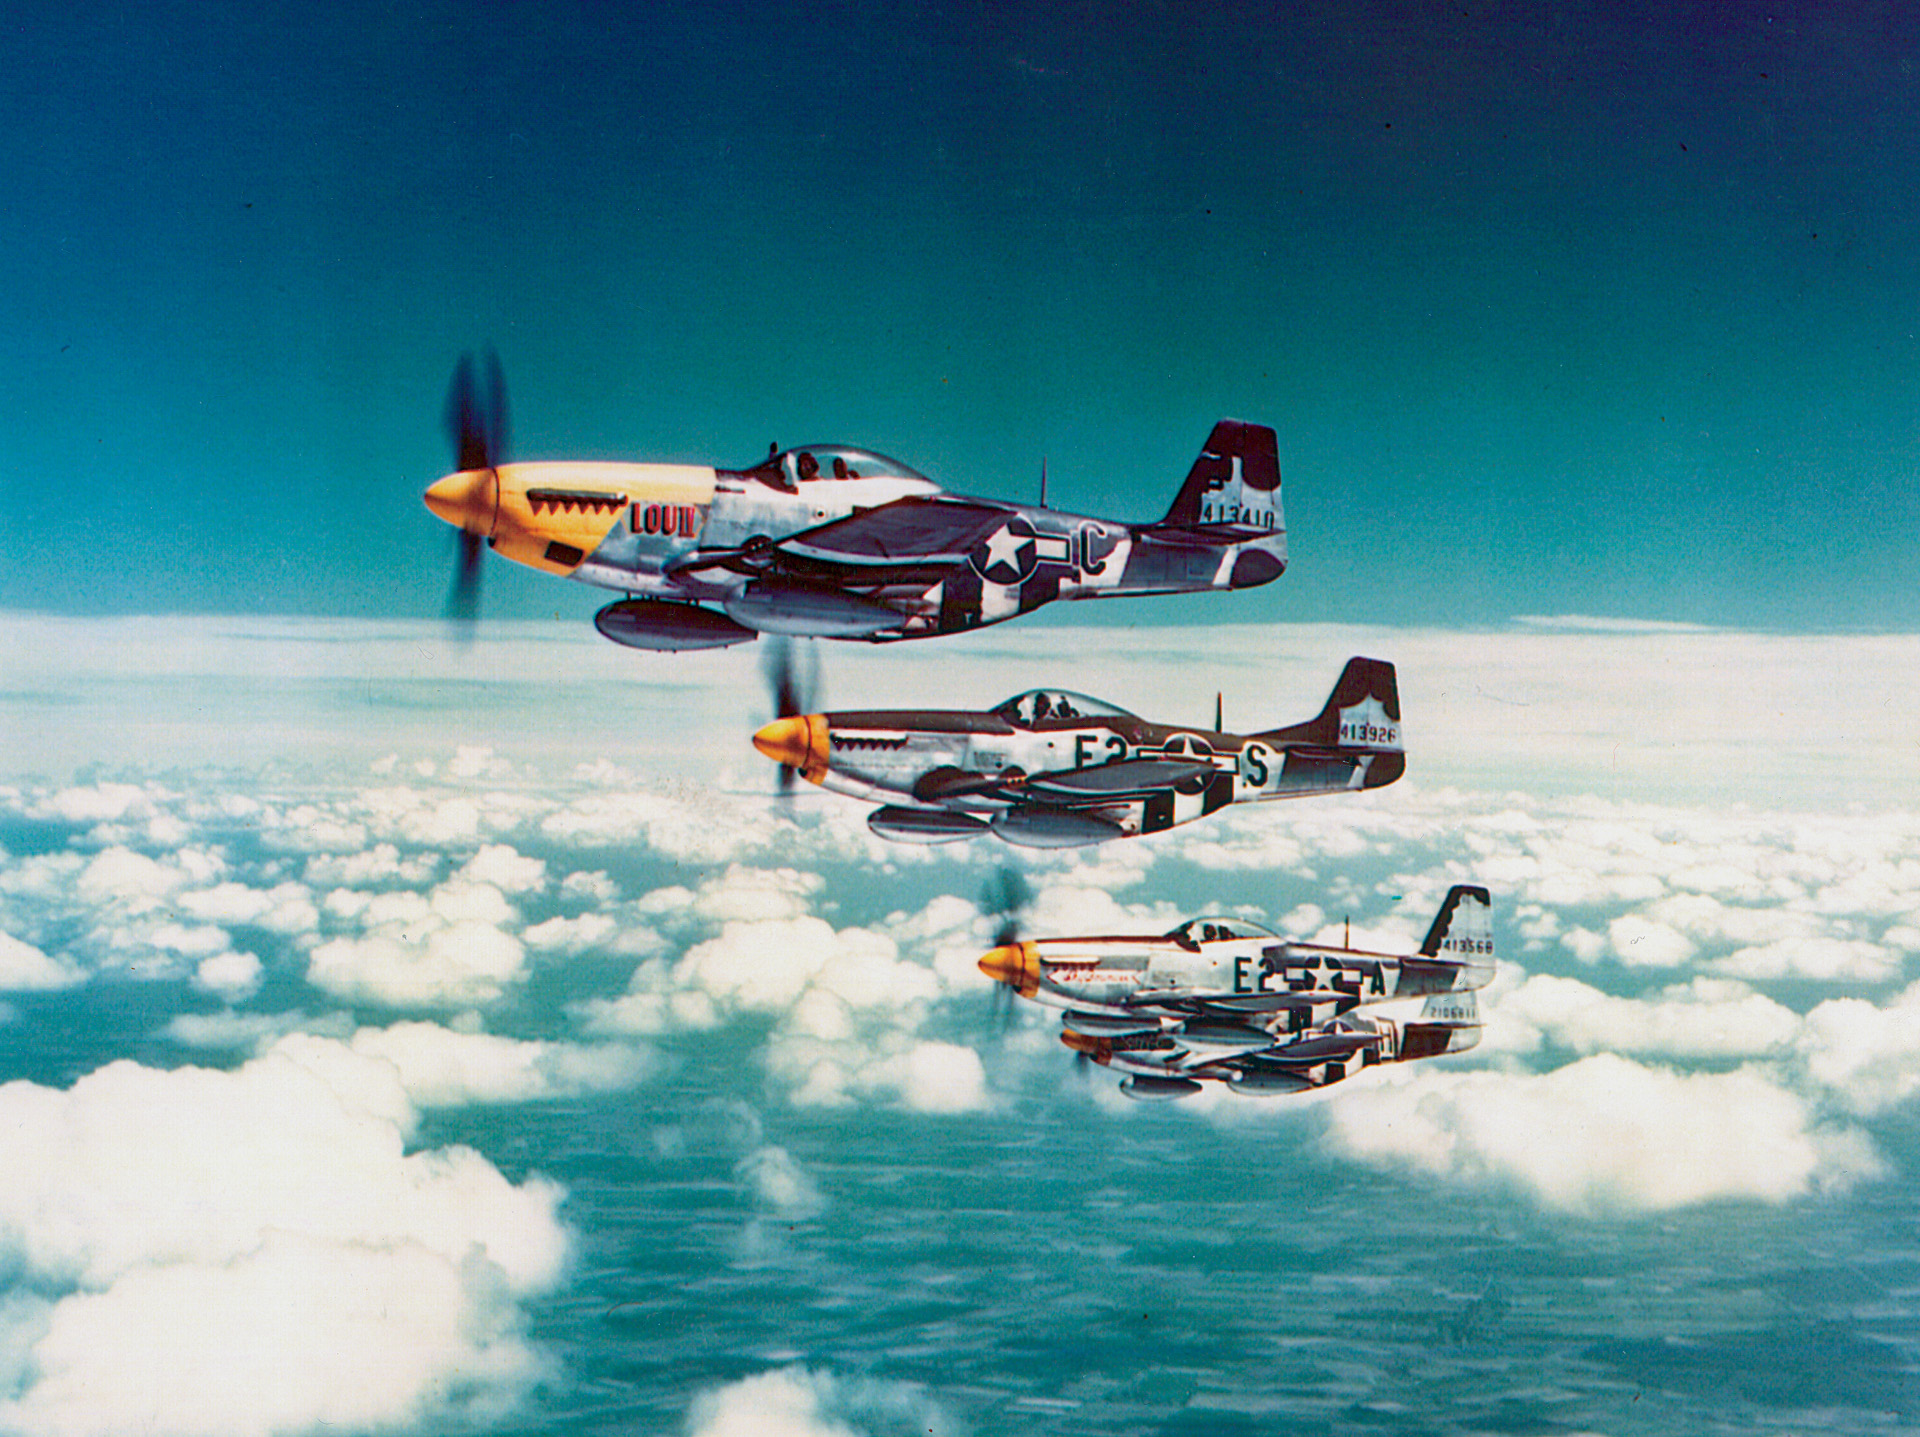 Carrying drop tanks to extend their range, a flight of P-51 Mustangs maintains formation in the skies over Europe. The P-51 became the premiere Allied long-range escort fighter of World War II, even reaching Berlin from airfields in England.